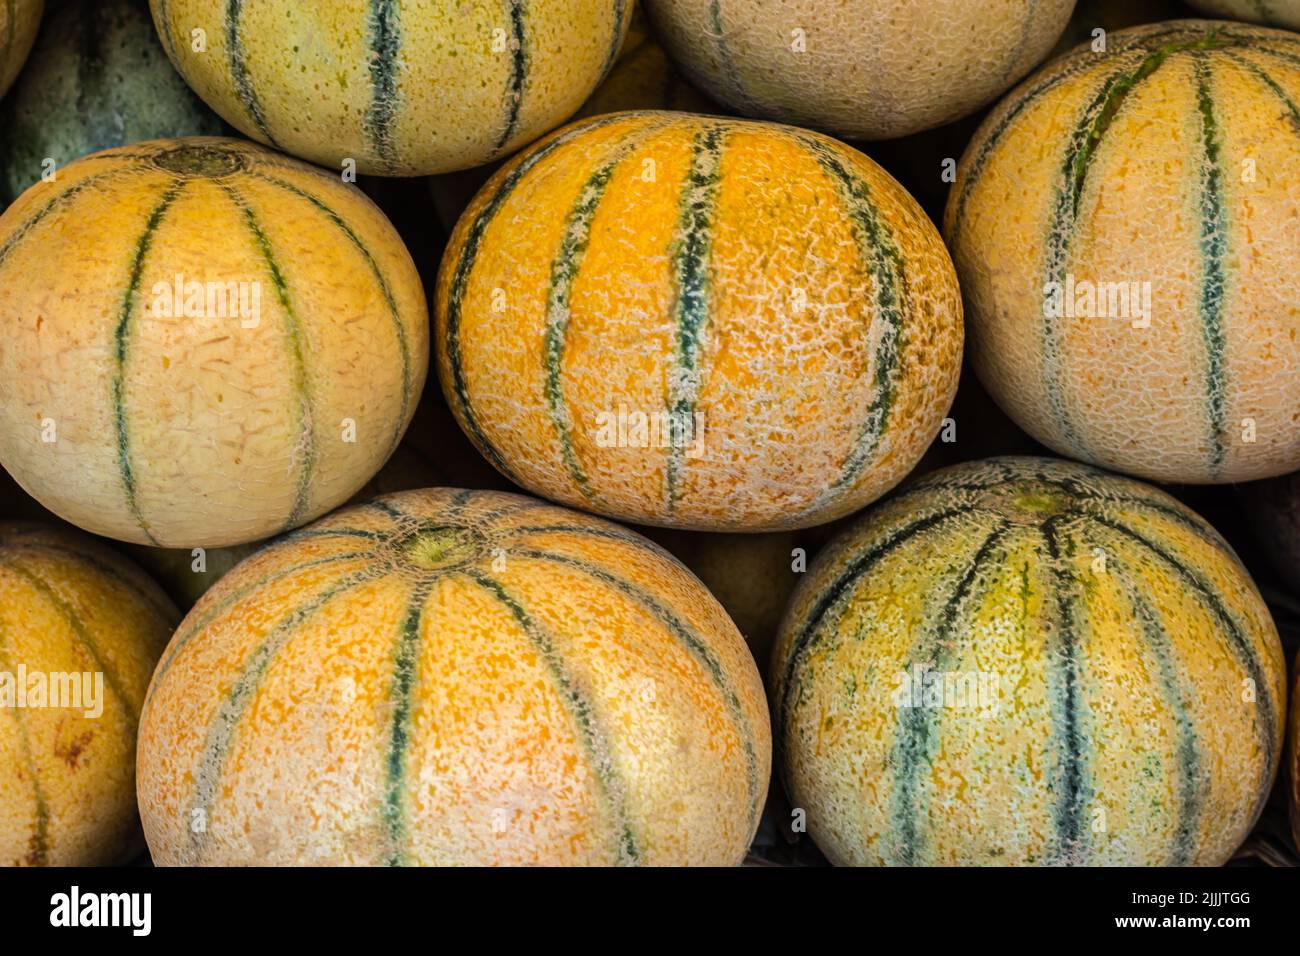 fresh organic muskmelon from farm close up from different angle Stock Photo